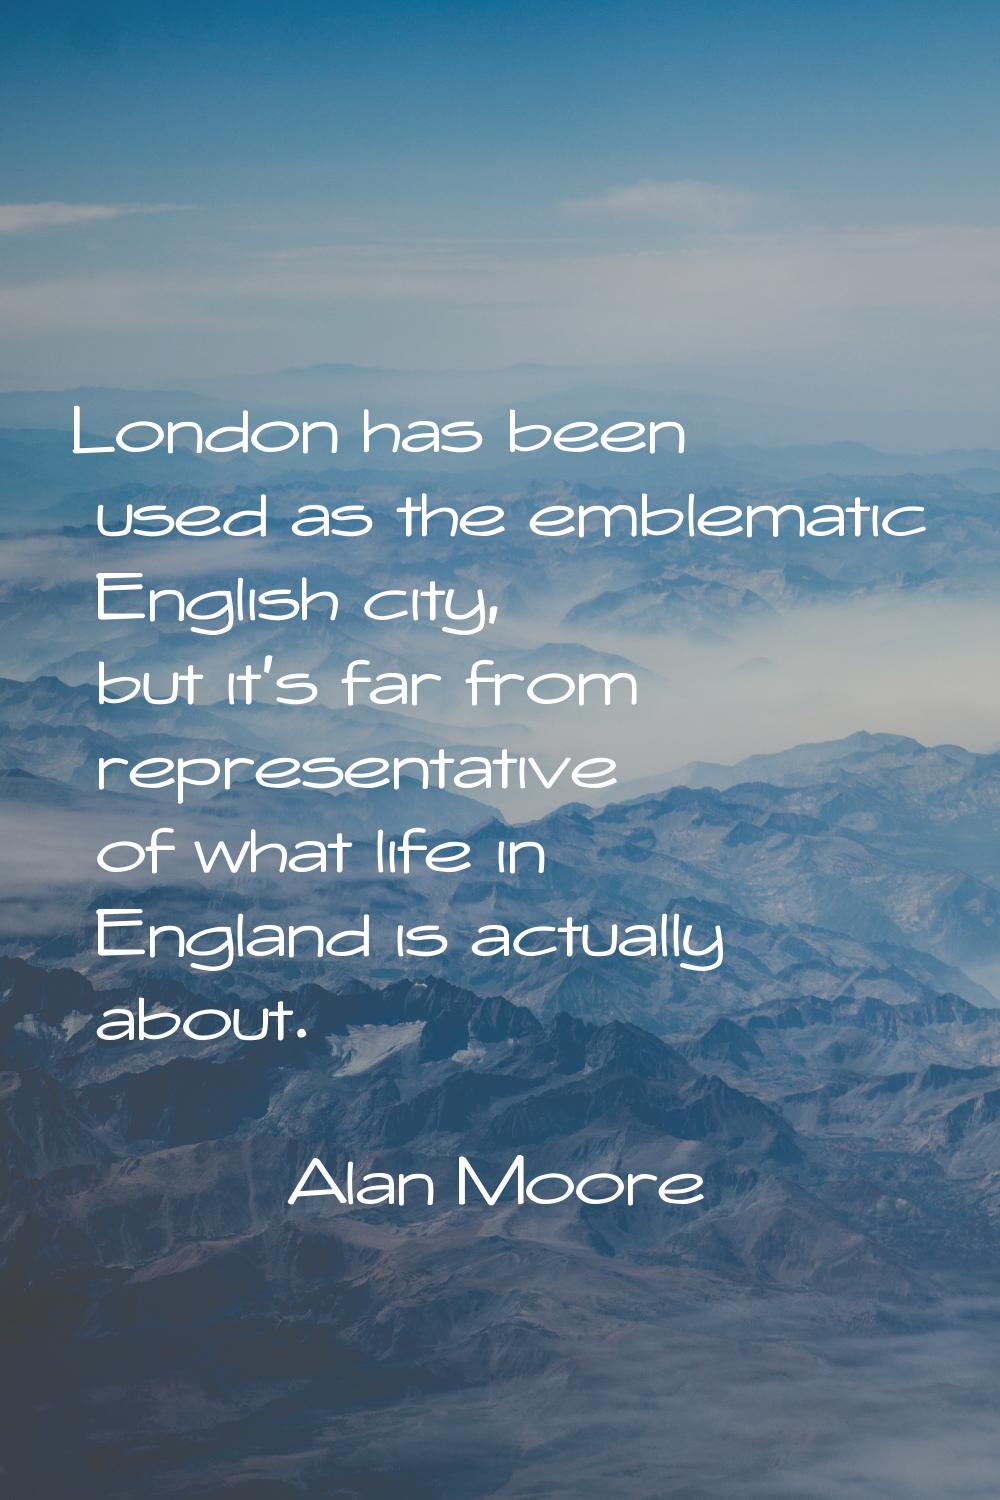 London has been used as the emblematic English city, but it's far from representative of what life 